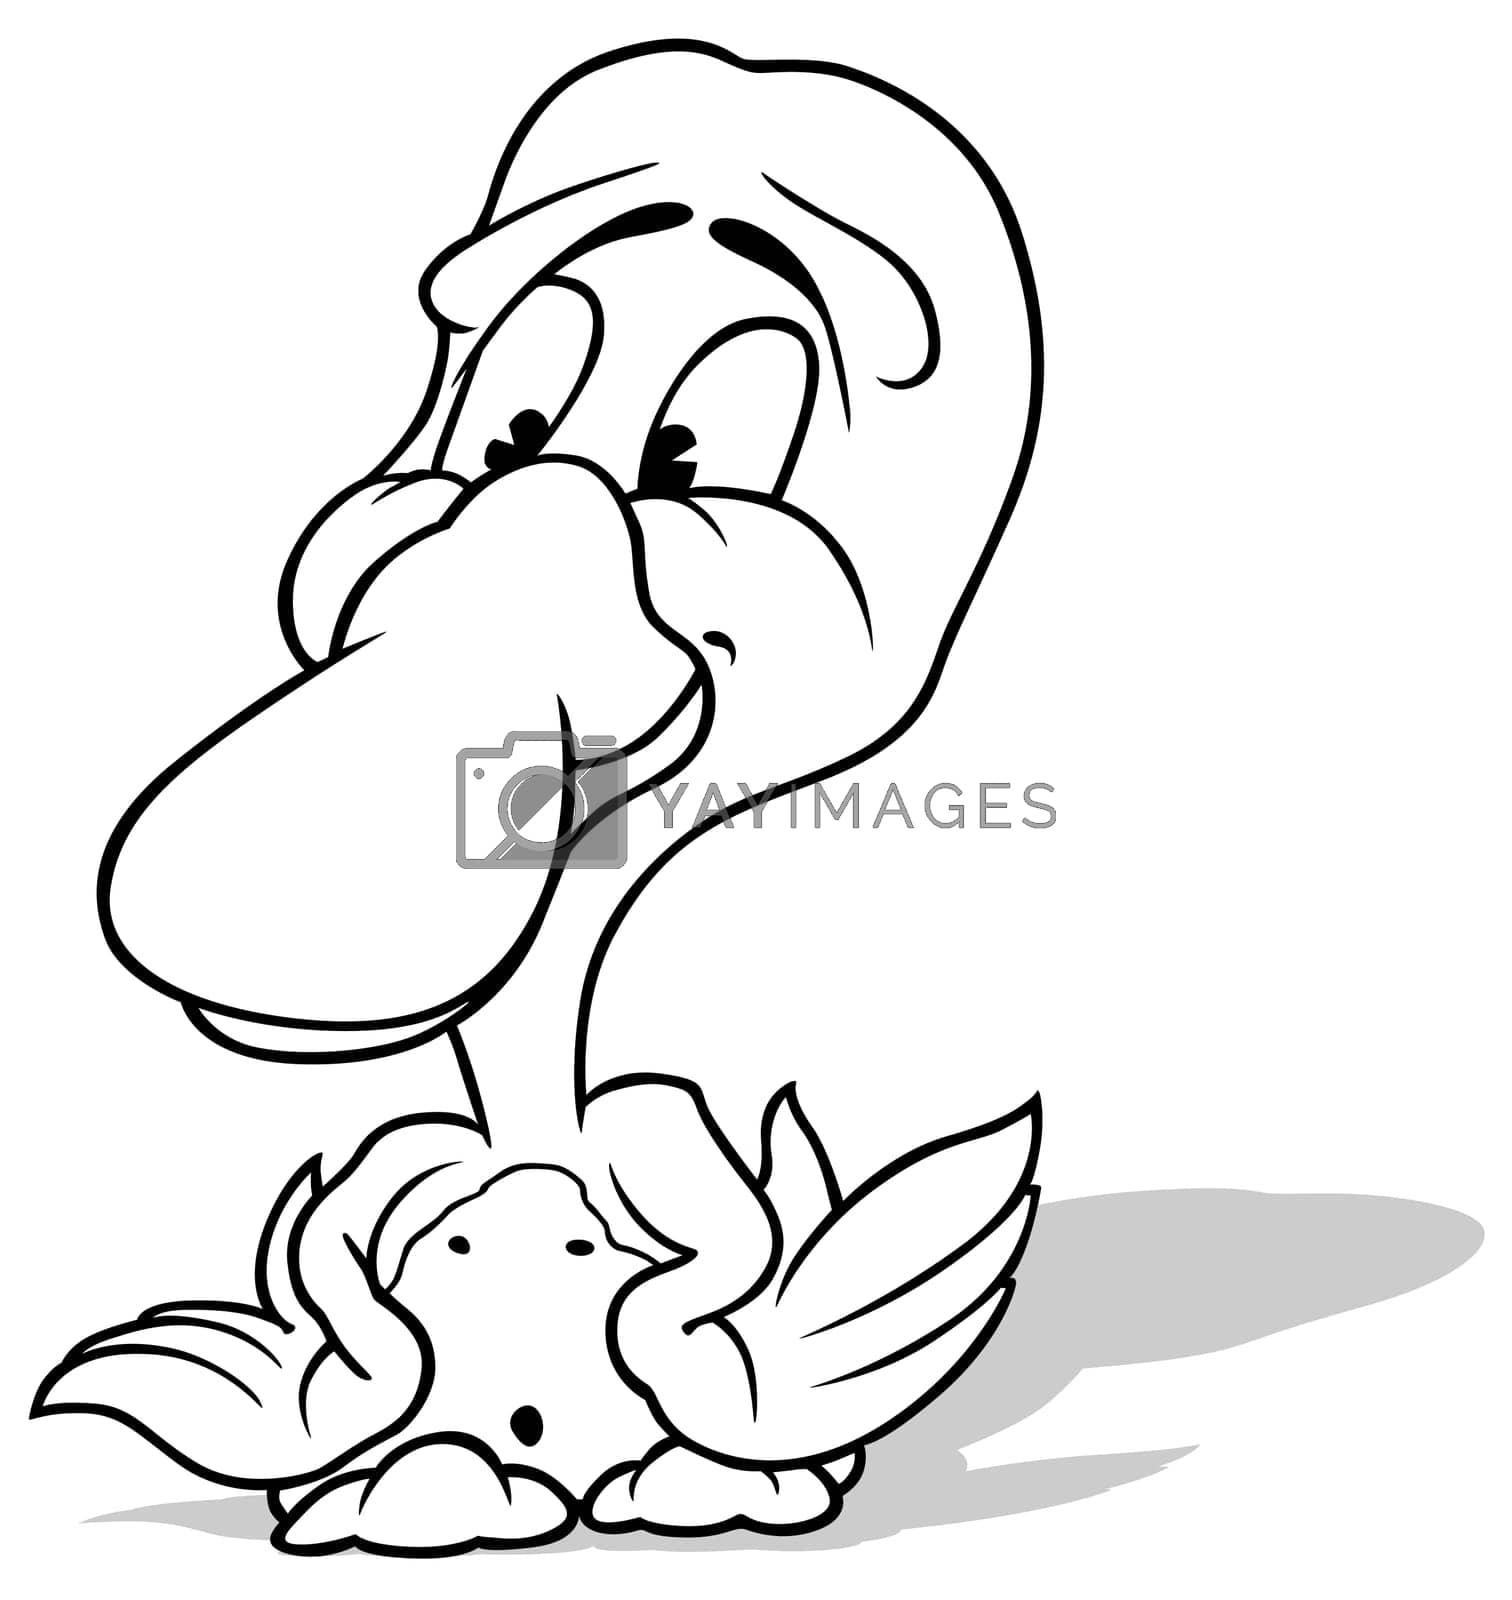 Royalty free image of Drawing of a Cute Little Duck by illustratorCZ